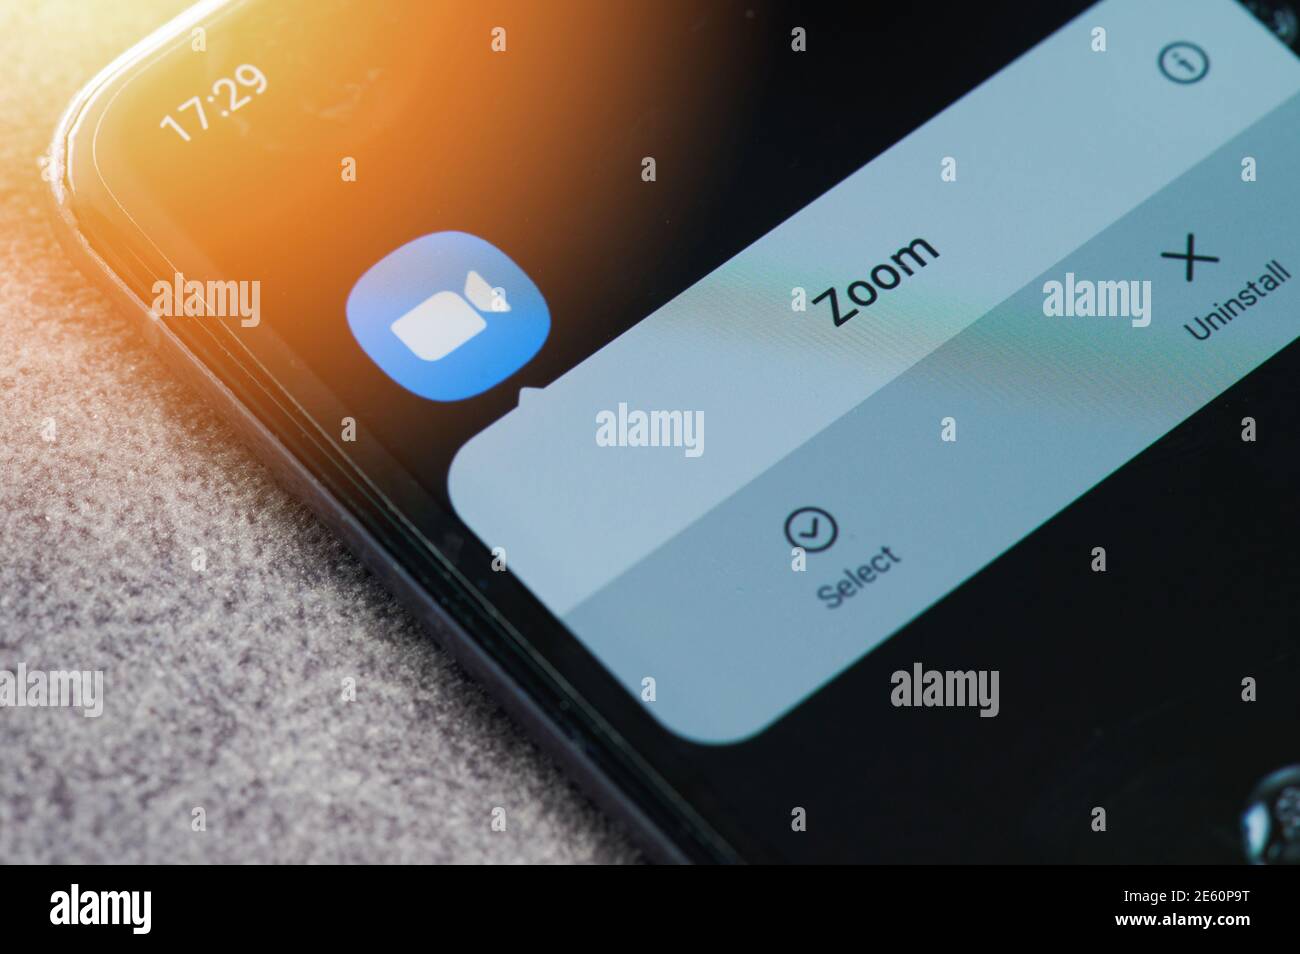 New york, USA - January 26, 2021: Open zoom app on smartphone screen close up view. Online meeting theme Stock Photo